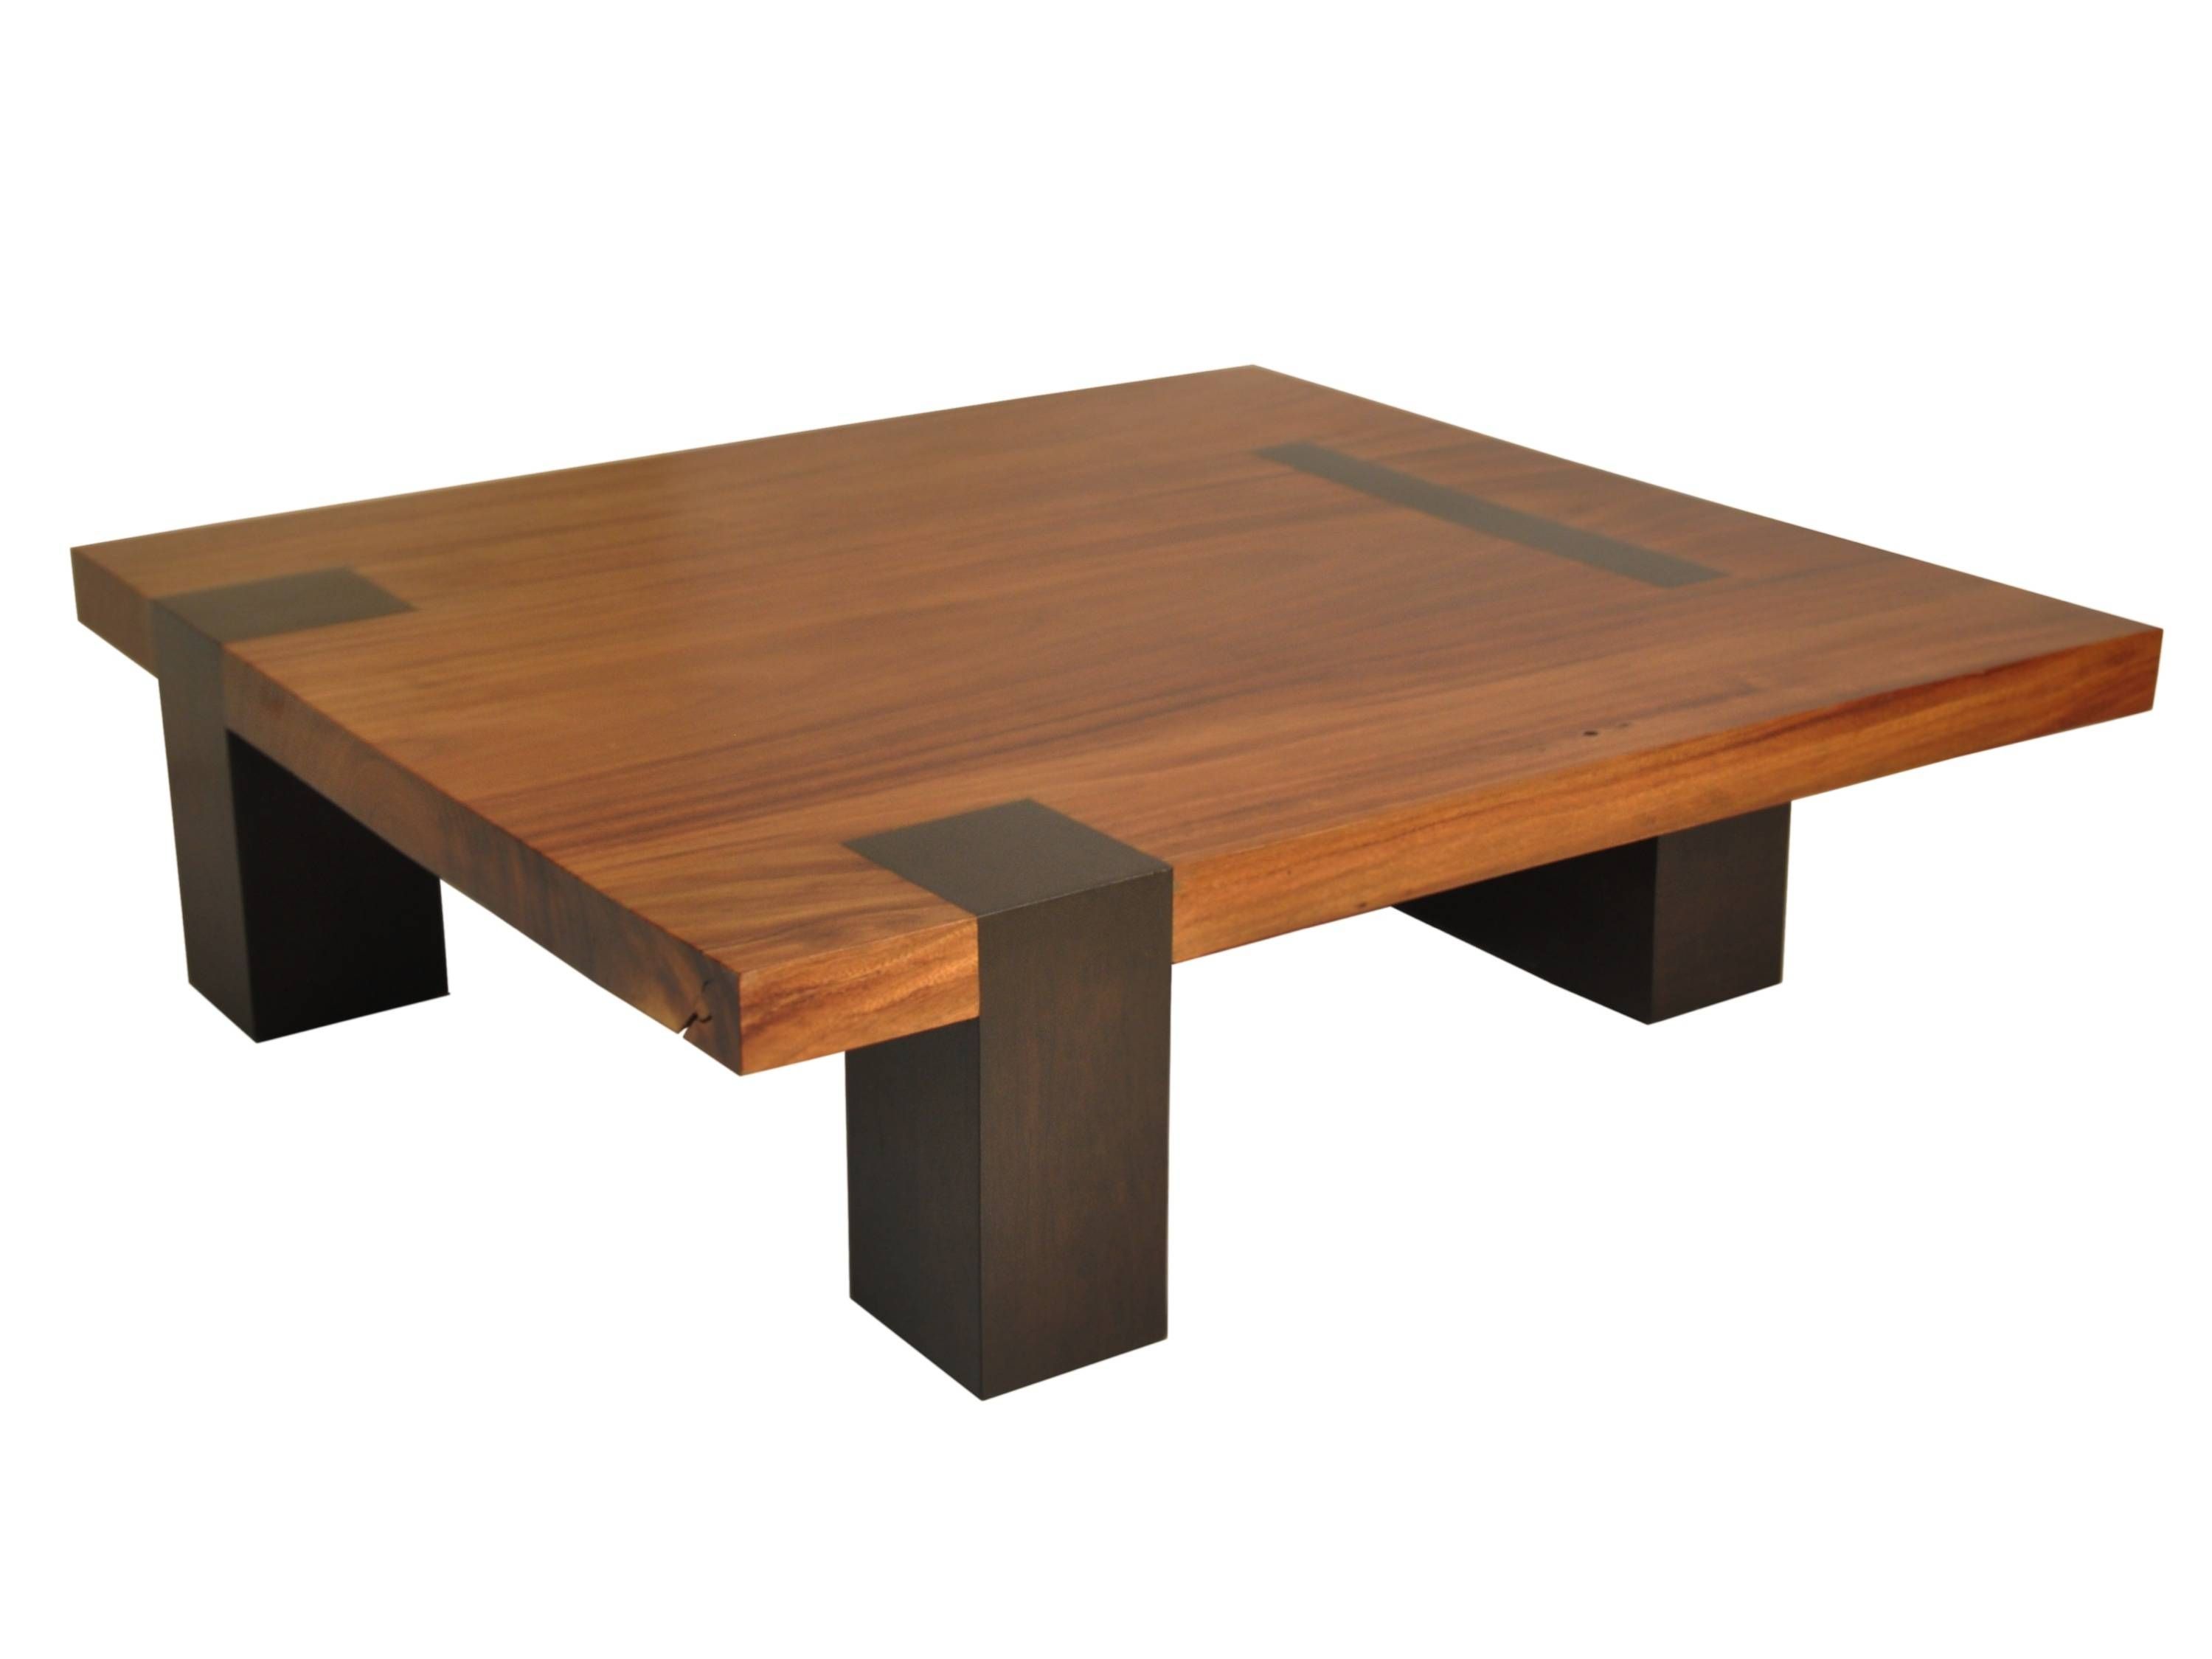 Coffee Table: Glamorous Square Wood Coffee Table Ideas Square Oak Regarding Square Large Coffee Tables (View 2 of 30)